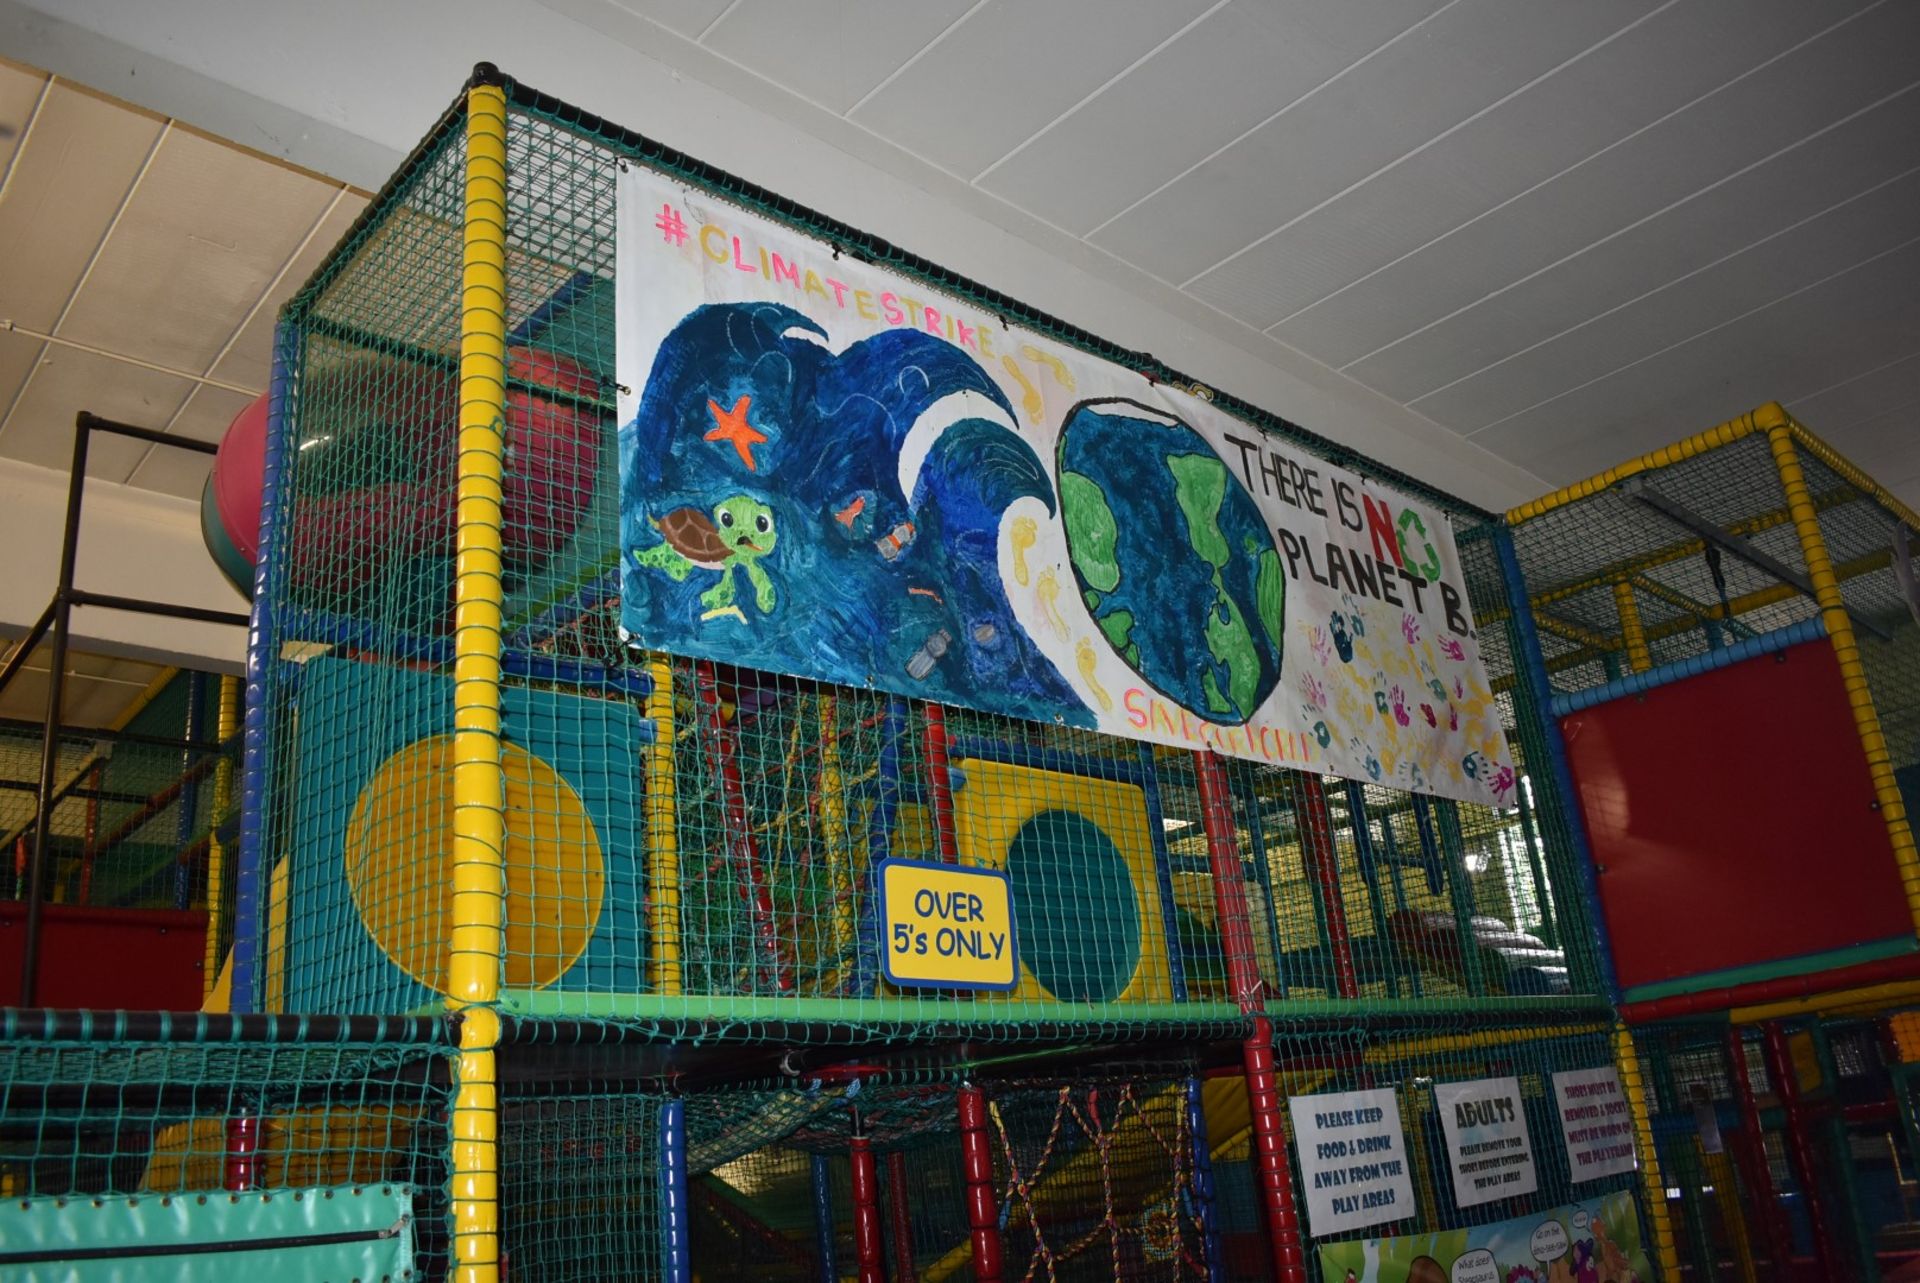 Bramleys Big Adventure Playground - Giant Action-Packed Playcentre With Slides, Zip Line Swings, - Image 84 of 128